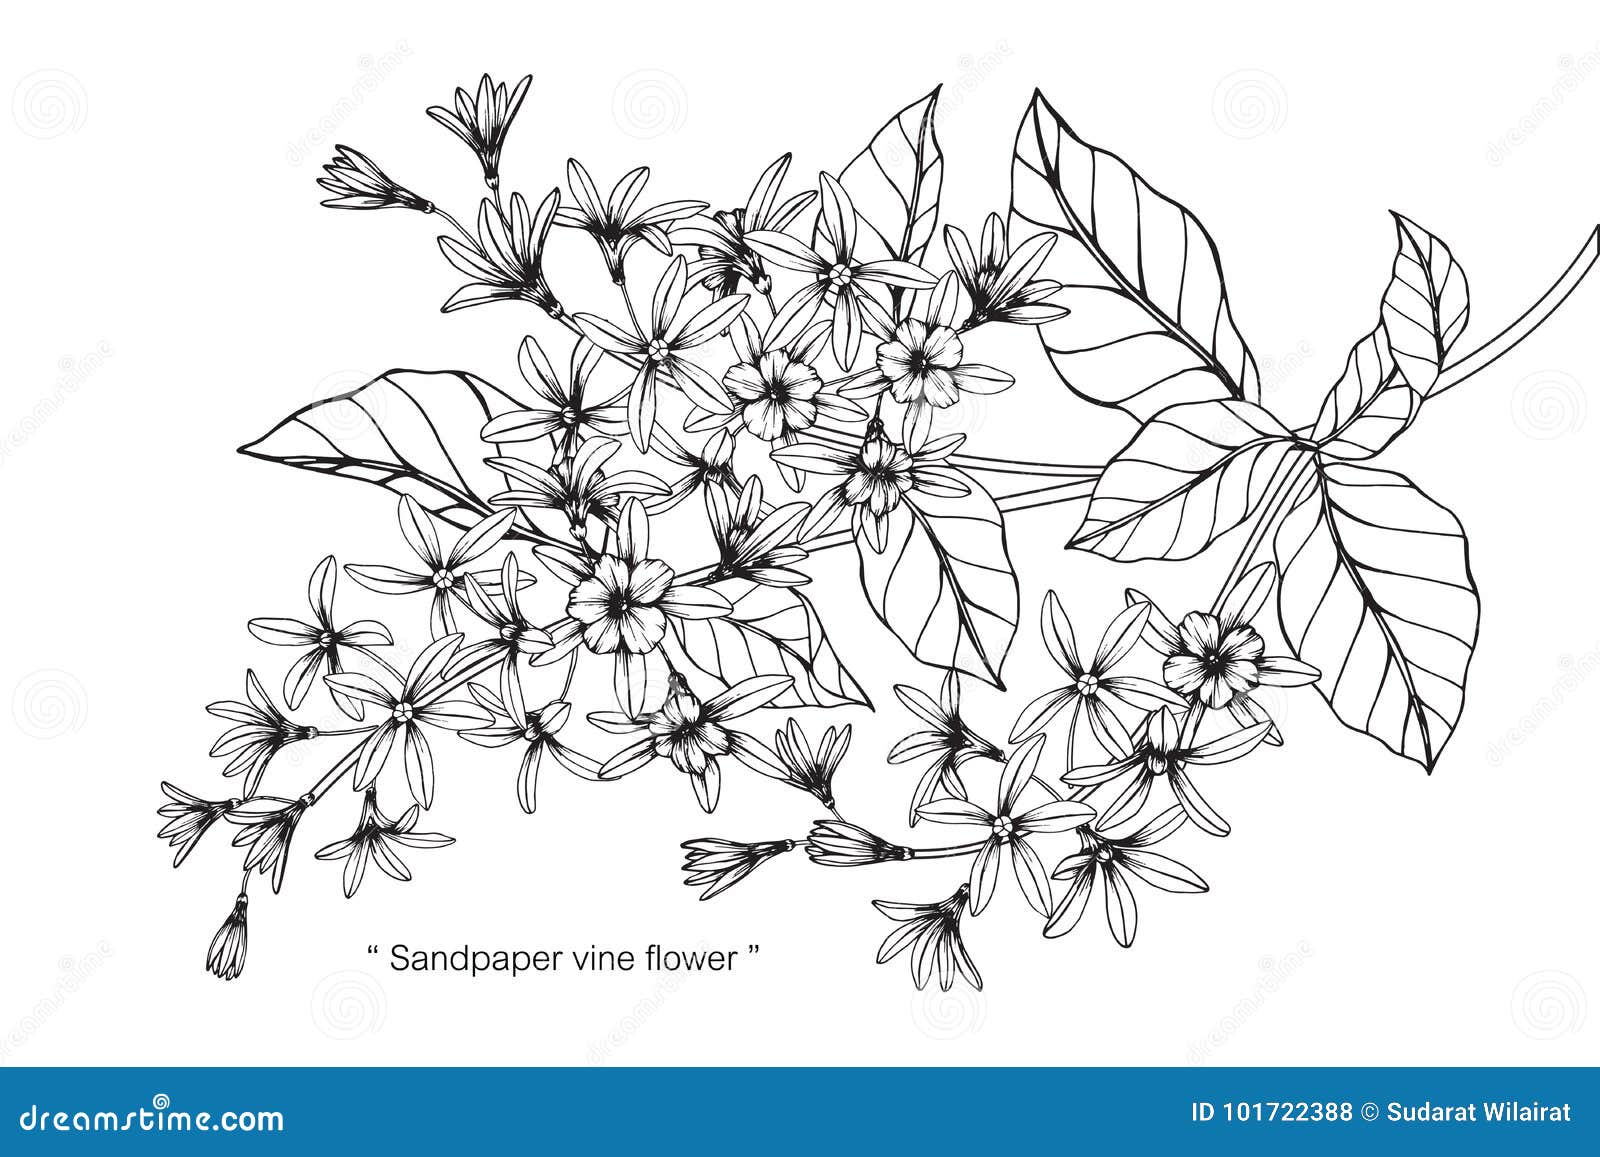 Drawing Vine Vector Images over 9800